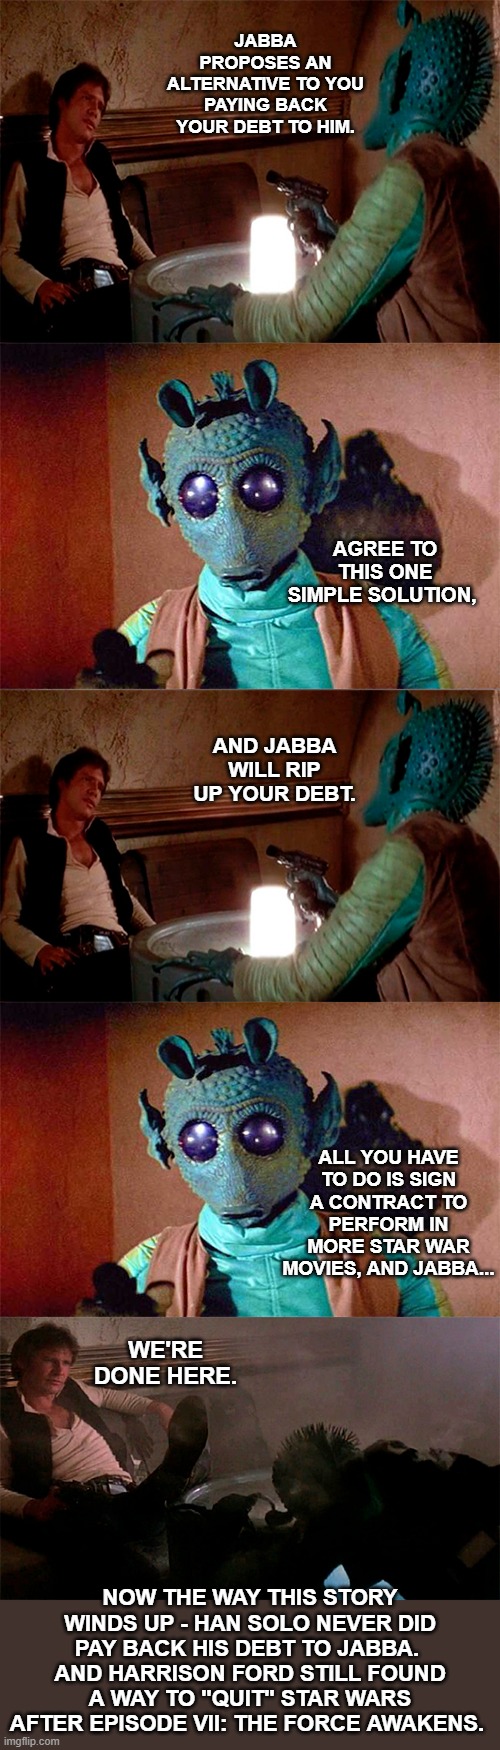 Han Solo Decides His Future | JABBA PROPOSES AN ALTERNATIVE TO YOU PAYING BACK YOUR DEBT TO HIM. AGREE TO THIS ONE SIMPLE SOLUTION, AND JABBA WILL RIP UP YOUR DEBT. ALL YOU HAVE TO DO IS SIGN A CONTRACT TO PERFORM IN MORE STAR WAR MOVIES, AND JABBA... WE'RE DONE HERE. NOW THE WAY THIS STORY WINDS UP - HAN SOLO NEVER DID PAY BACK HIS DEBT TO JABBA.  AND HARRISON FORD STILL FOUND A WAY TO "QUIT" STAR WARS AFTER EPISODE VII: THE FORCE AWAKENS. | image tagged in han solo shoots greedo,star wars,han solo,dark humor,lol,funny | made w/ Imgflip meme maker